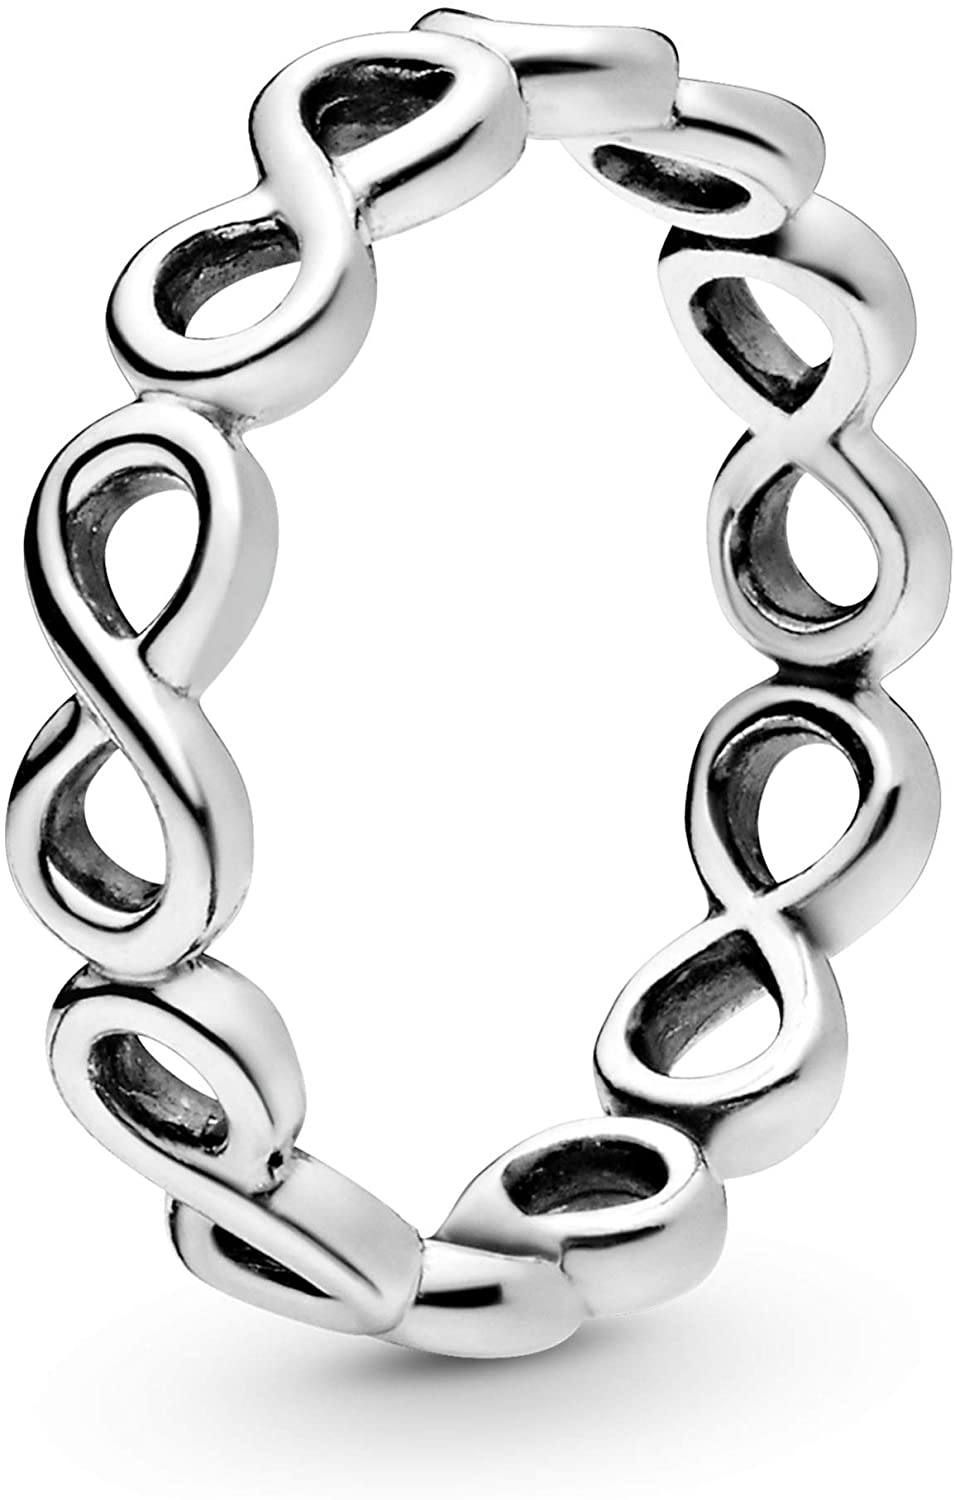 Pandora Jewelry Simple Infinity Band Sterling Silver Ring, Size 7.5